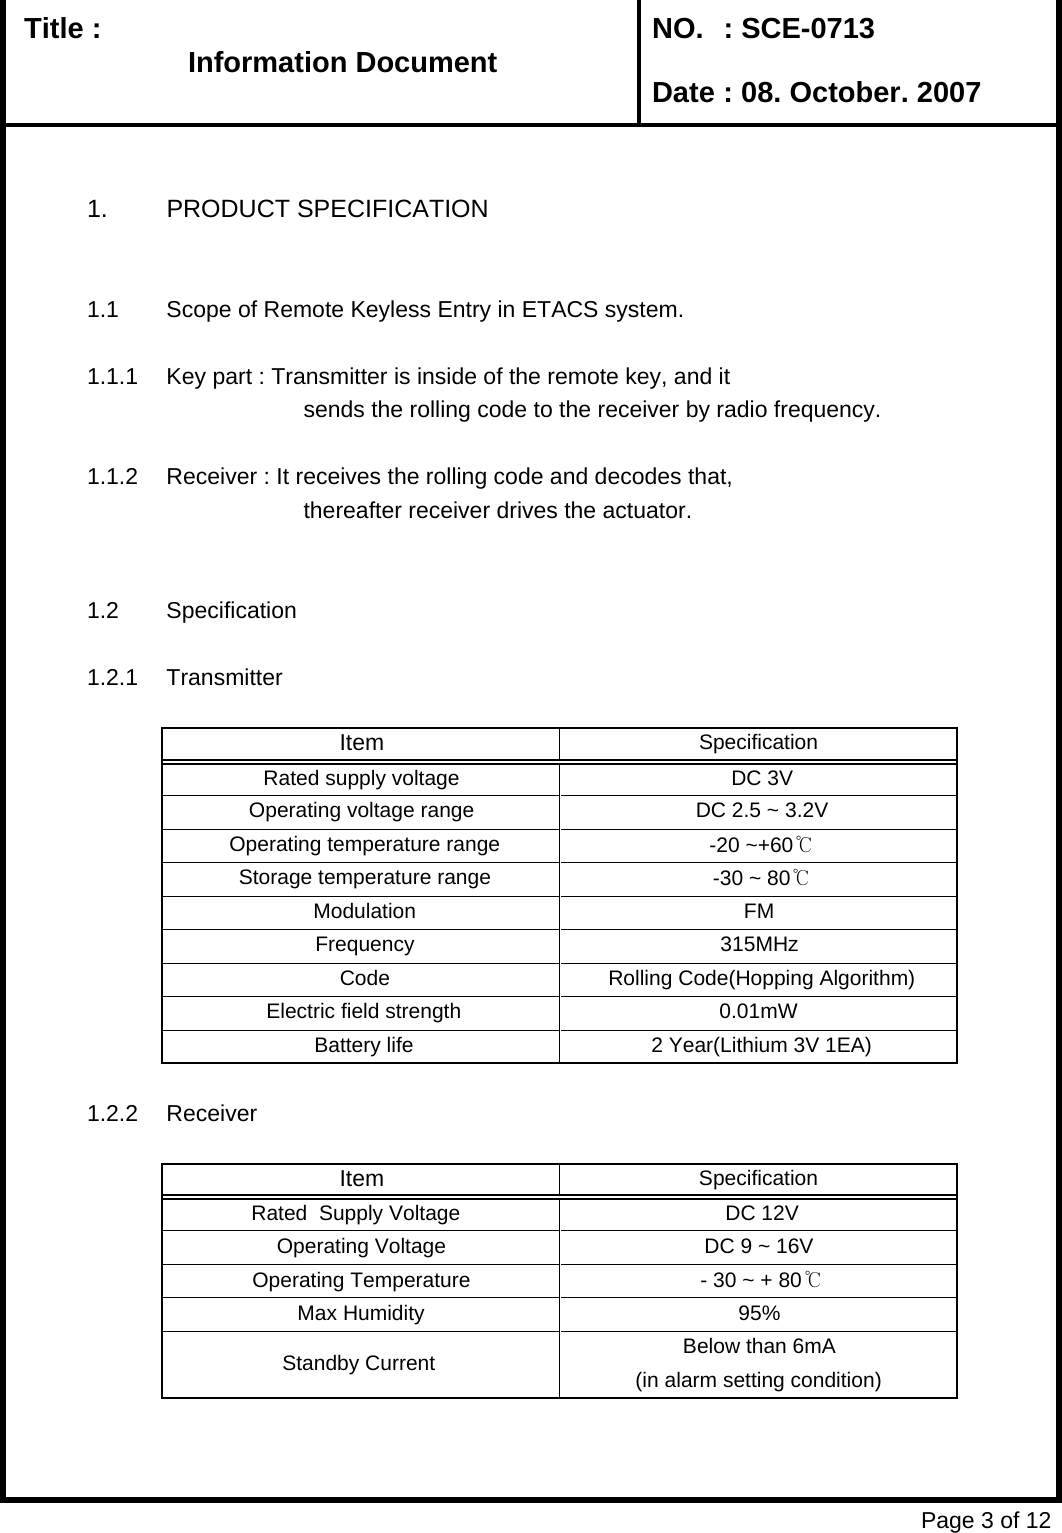   Title :  NO. : SCE-0713 Date : 08. October. 20071. PRODUCT SPECIFICATION1.1 Scope of Remote Keyless Entry in ETACS system.1.1.1 Key part : Transmitter is inside of the remote key, and it          sends the rolling code to the receiver by radio frequency. 1.1.2 Receiver : It receives the rolling code and decodes that,         thereafter receiver drives the actuator.1.2 Specification1.2.1 Transmitter1.2.2 ReceiverPage 3 of 12 Storage temperature range  -30 ~ 80℃ Modulation FMItem SpecificationRated supply voltage  DC 3VOperating voltage range  DC 2.5 ~ 3.2V Operating temperature range  -20 ~+60℃ Electric field strength 0.01mW Frequency 315MHz Code  Rolling Code(Hopping Algorithm) - 30 ~ + 80℃Max Humidity 95% Battery life  2 Year(Lithium 3V 1EA)Below than 6mA(in alarm setting condition) Standby Current  SpecificationItem DC 9 ~ 16V  Operating Voltage  DC 12V Rated  Supply Voltage    Operating Temperature Information DocumentInformation Document